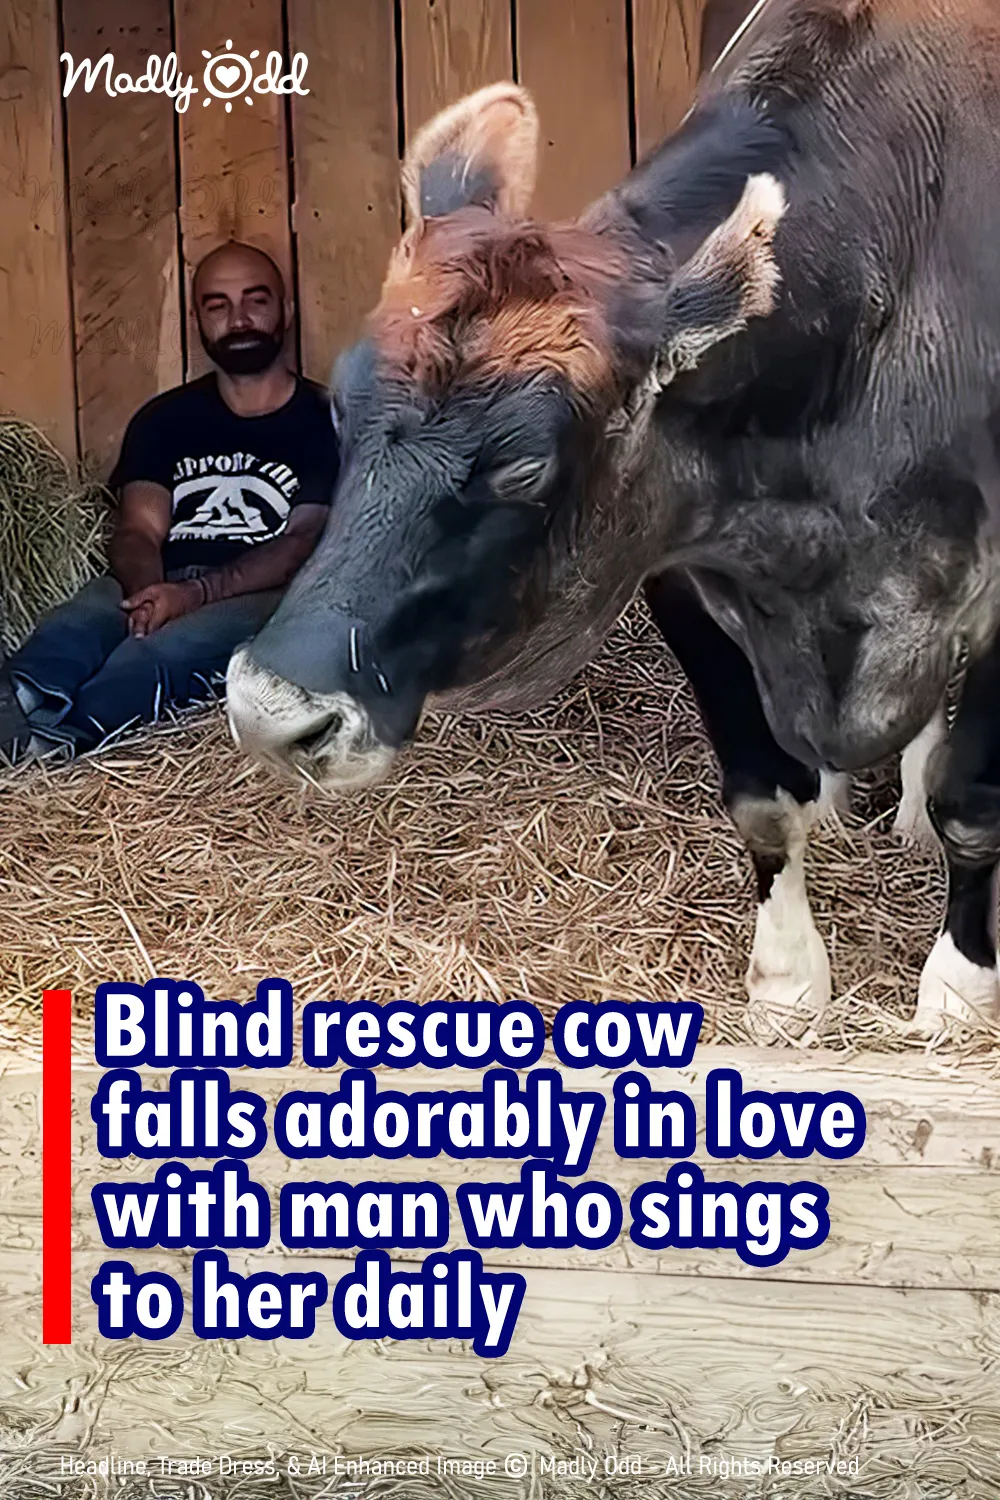 Blind rescue cow falls adorably in love with man who sings to her daily